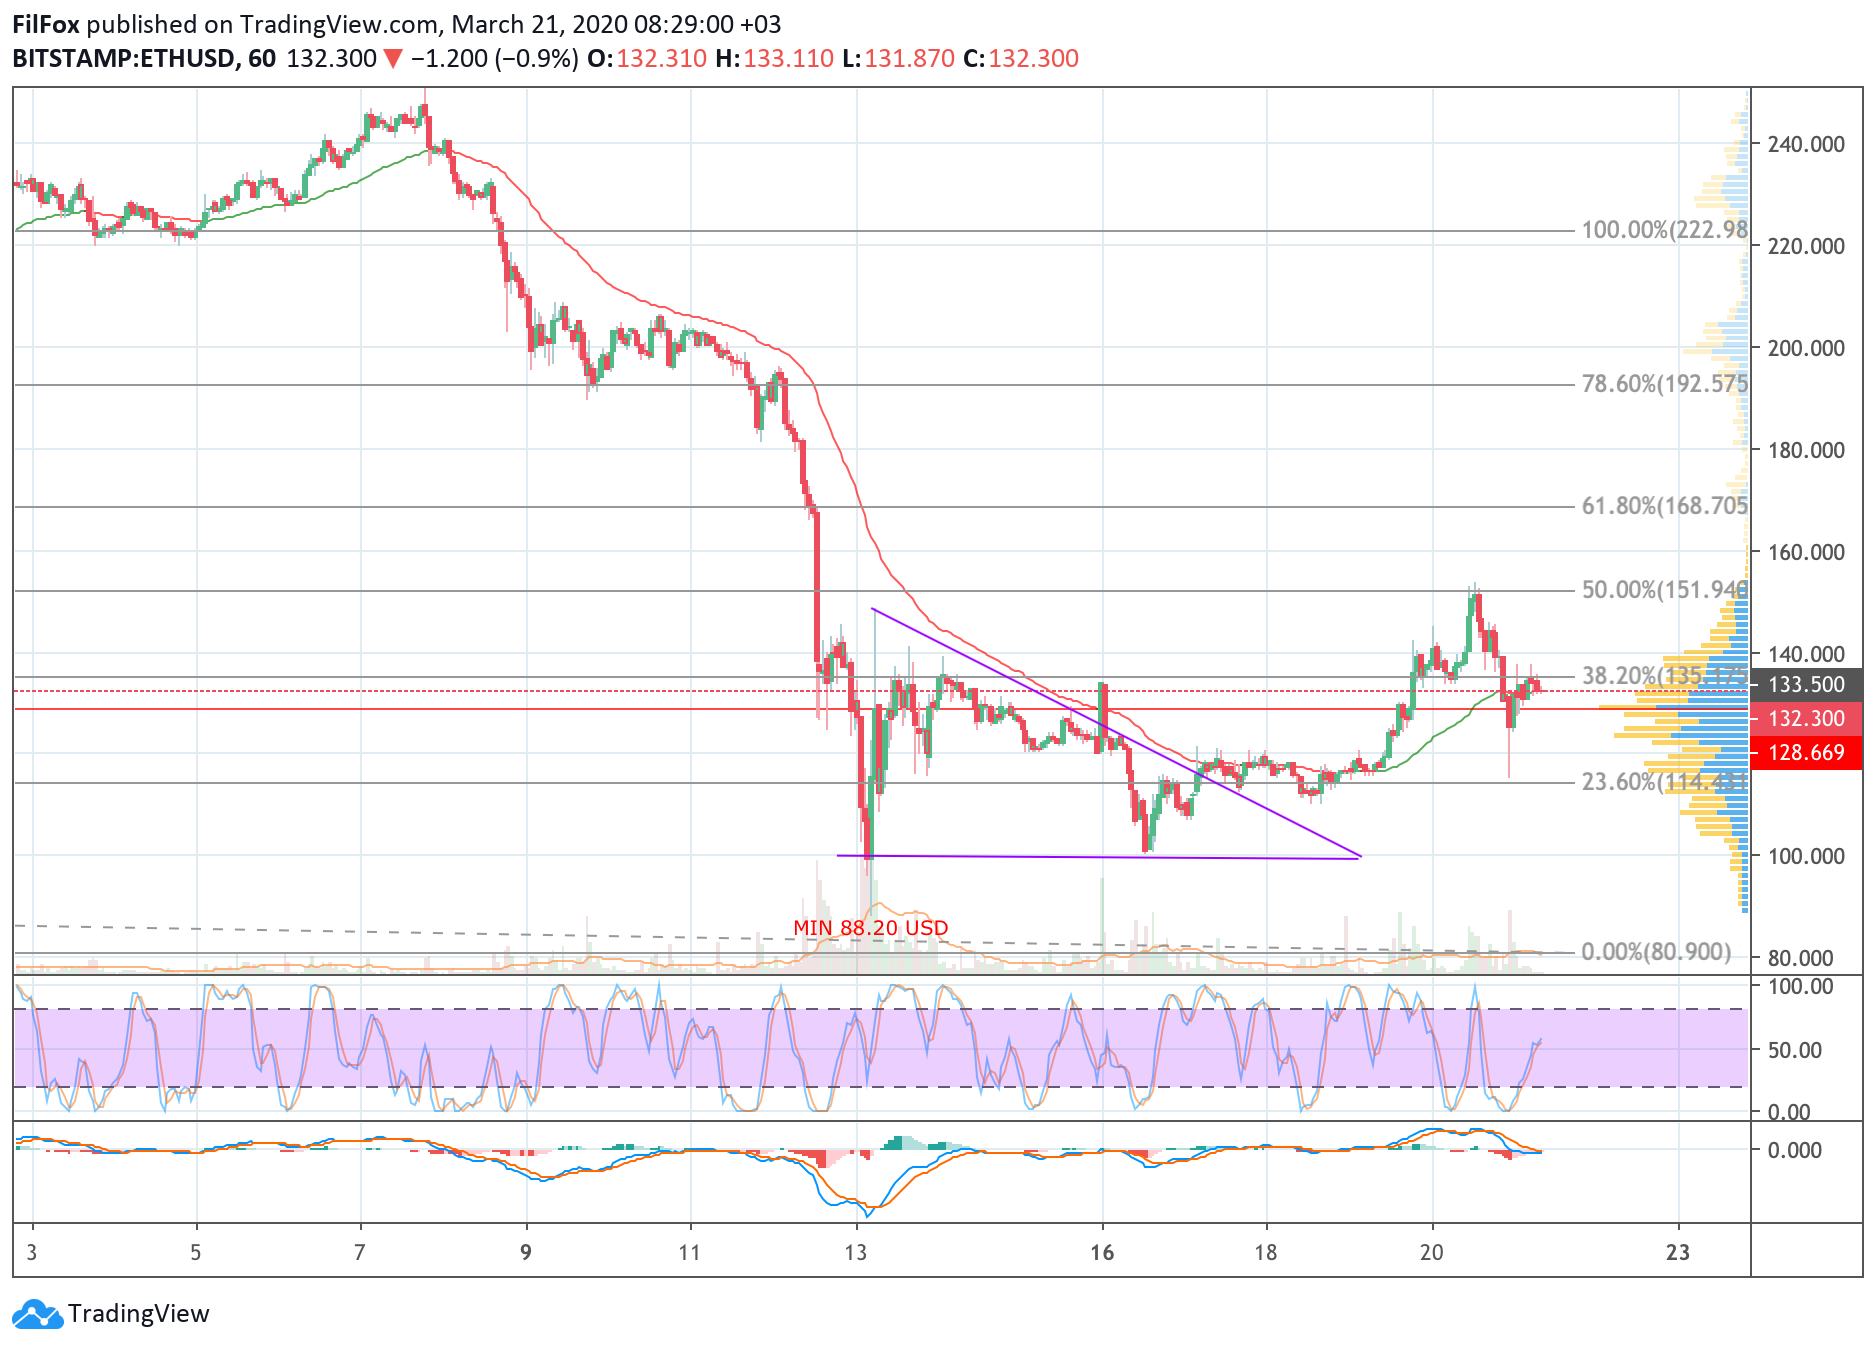 Analysis of cryptocurrency pairs BTC / USD, ETH / USD and XRP / USD on 03/21/2020